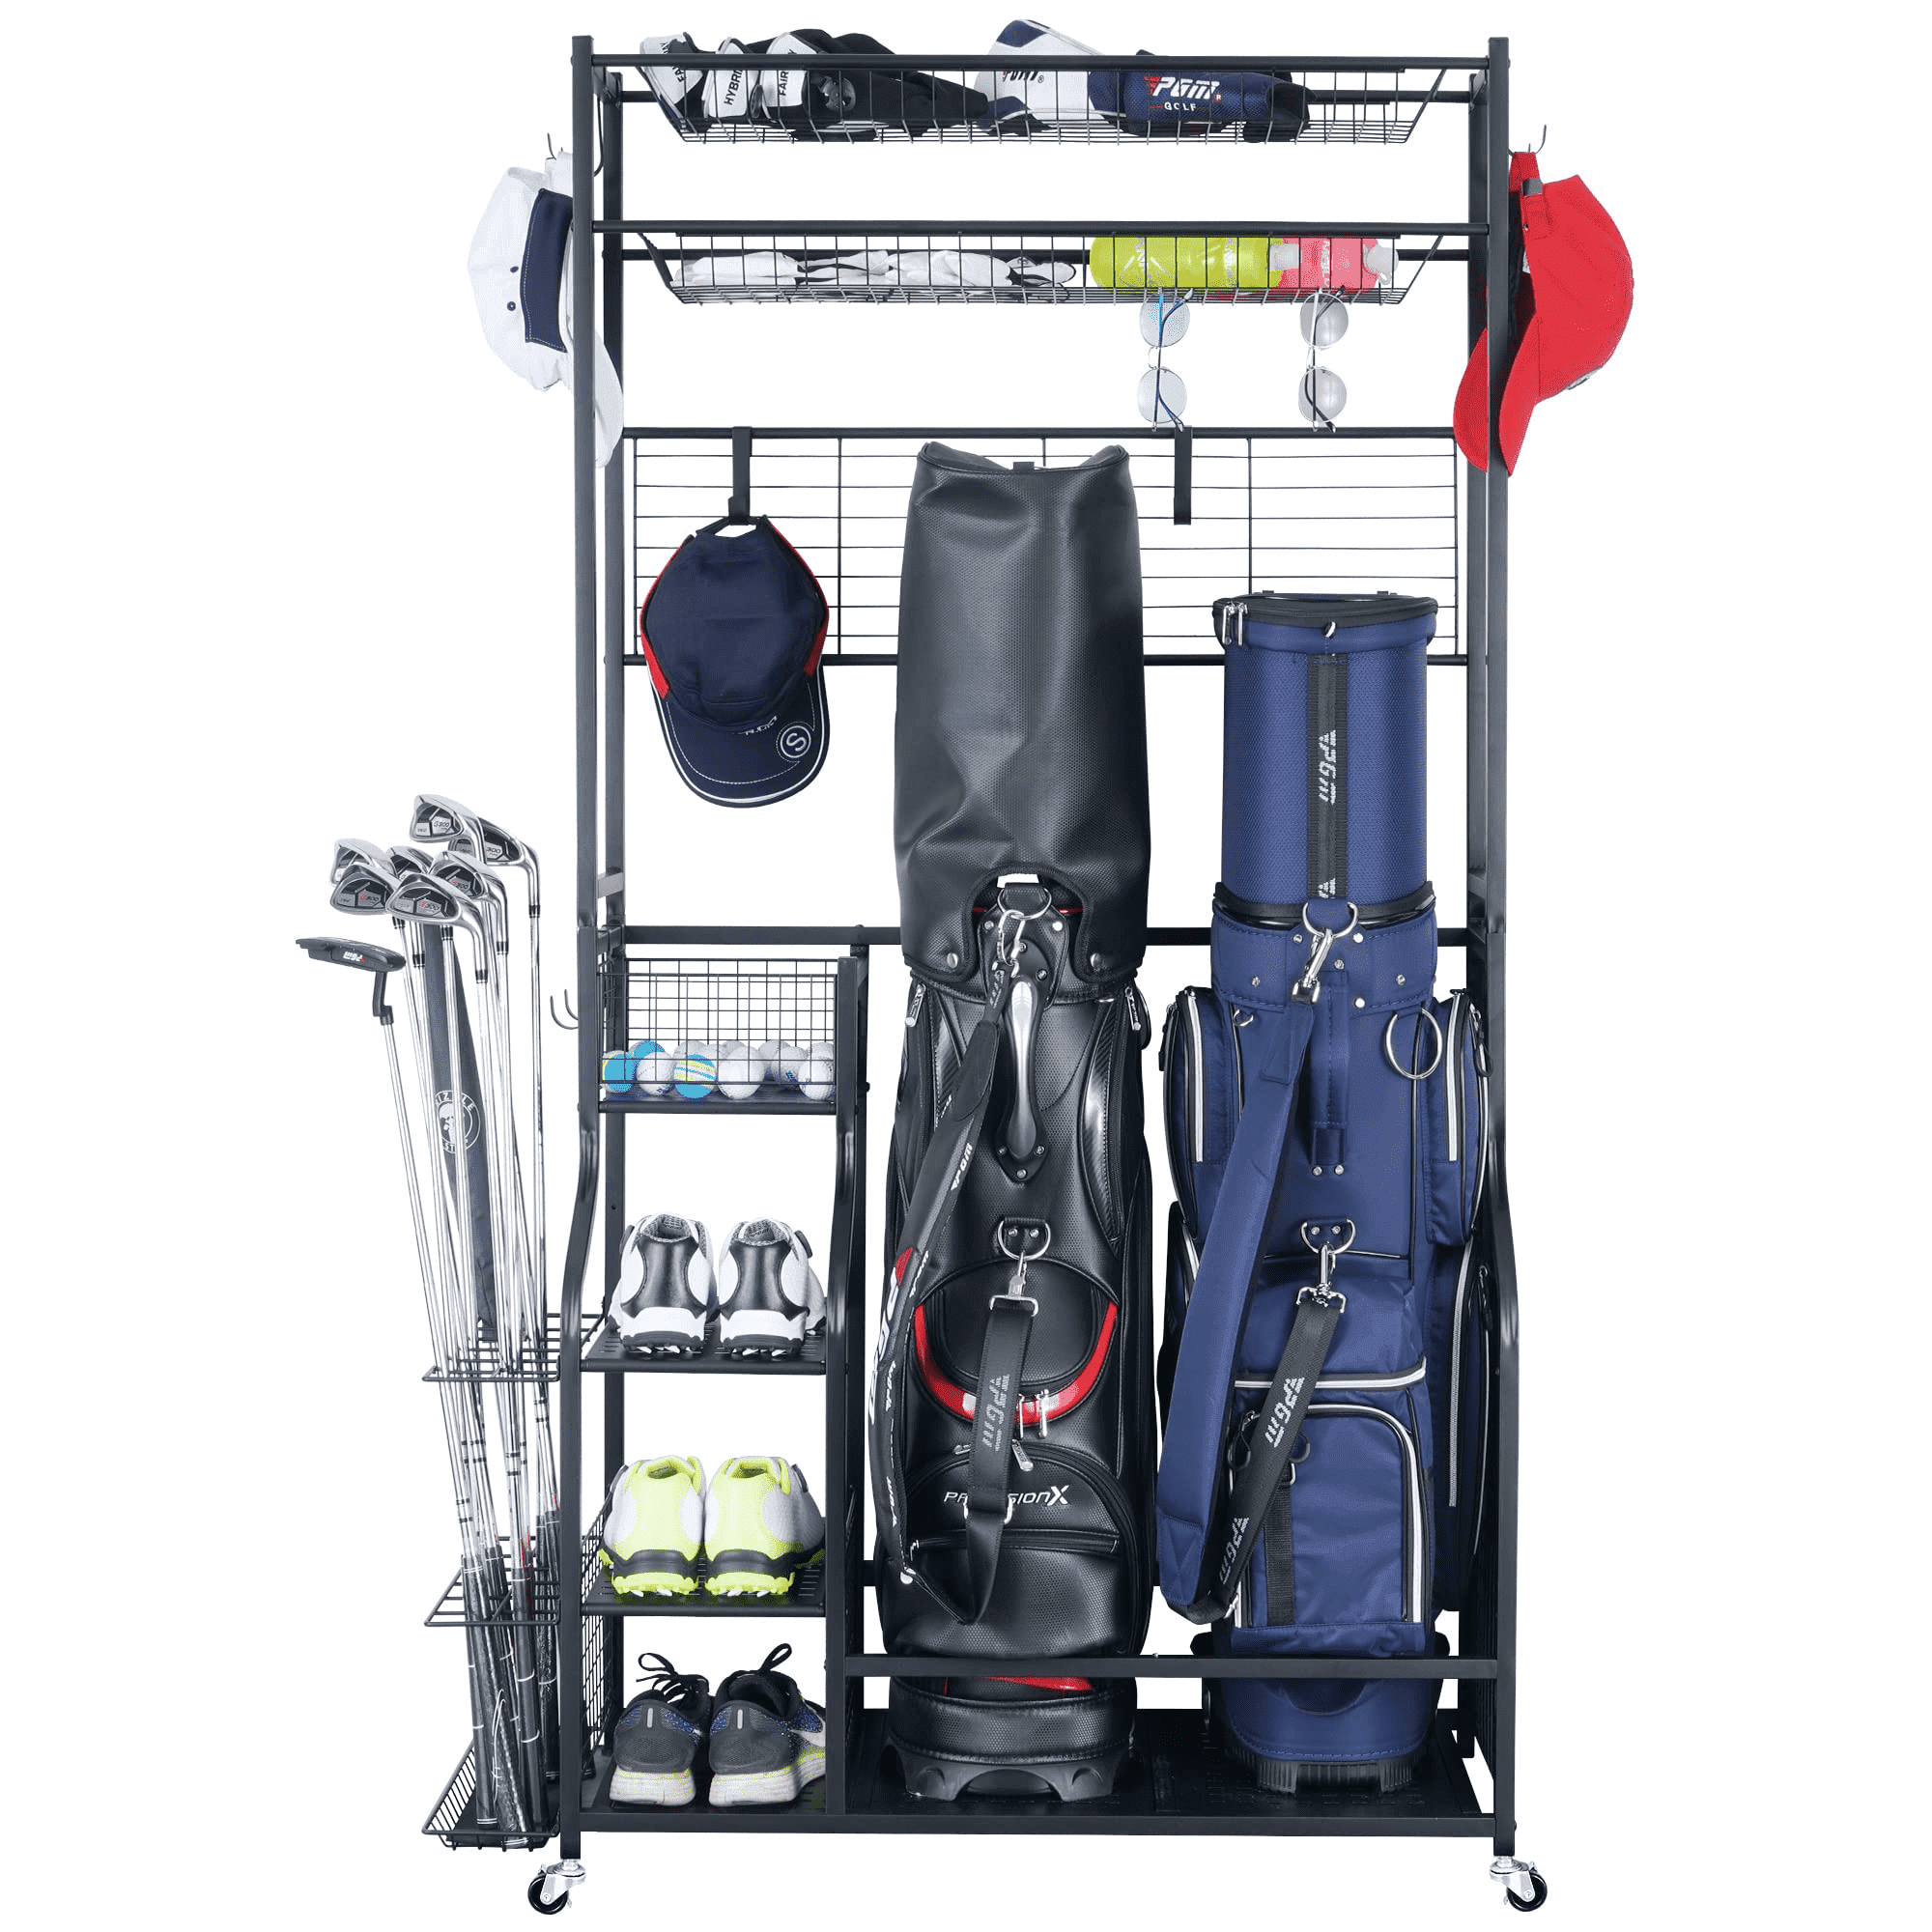 Mythinglogic Golf Bag Storage Garage Organizer,2 Golf Bags Storage Stand  and Golfing Equipment Accessories Storage Rack with 4 Removable Hooks,  Extra